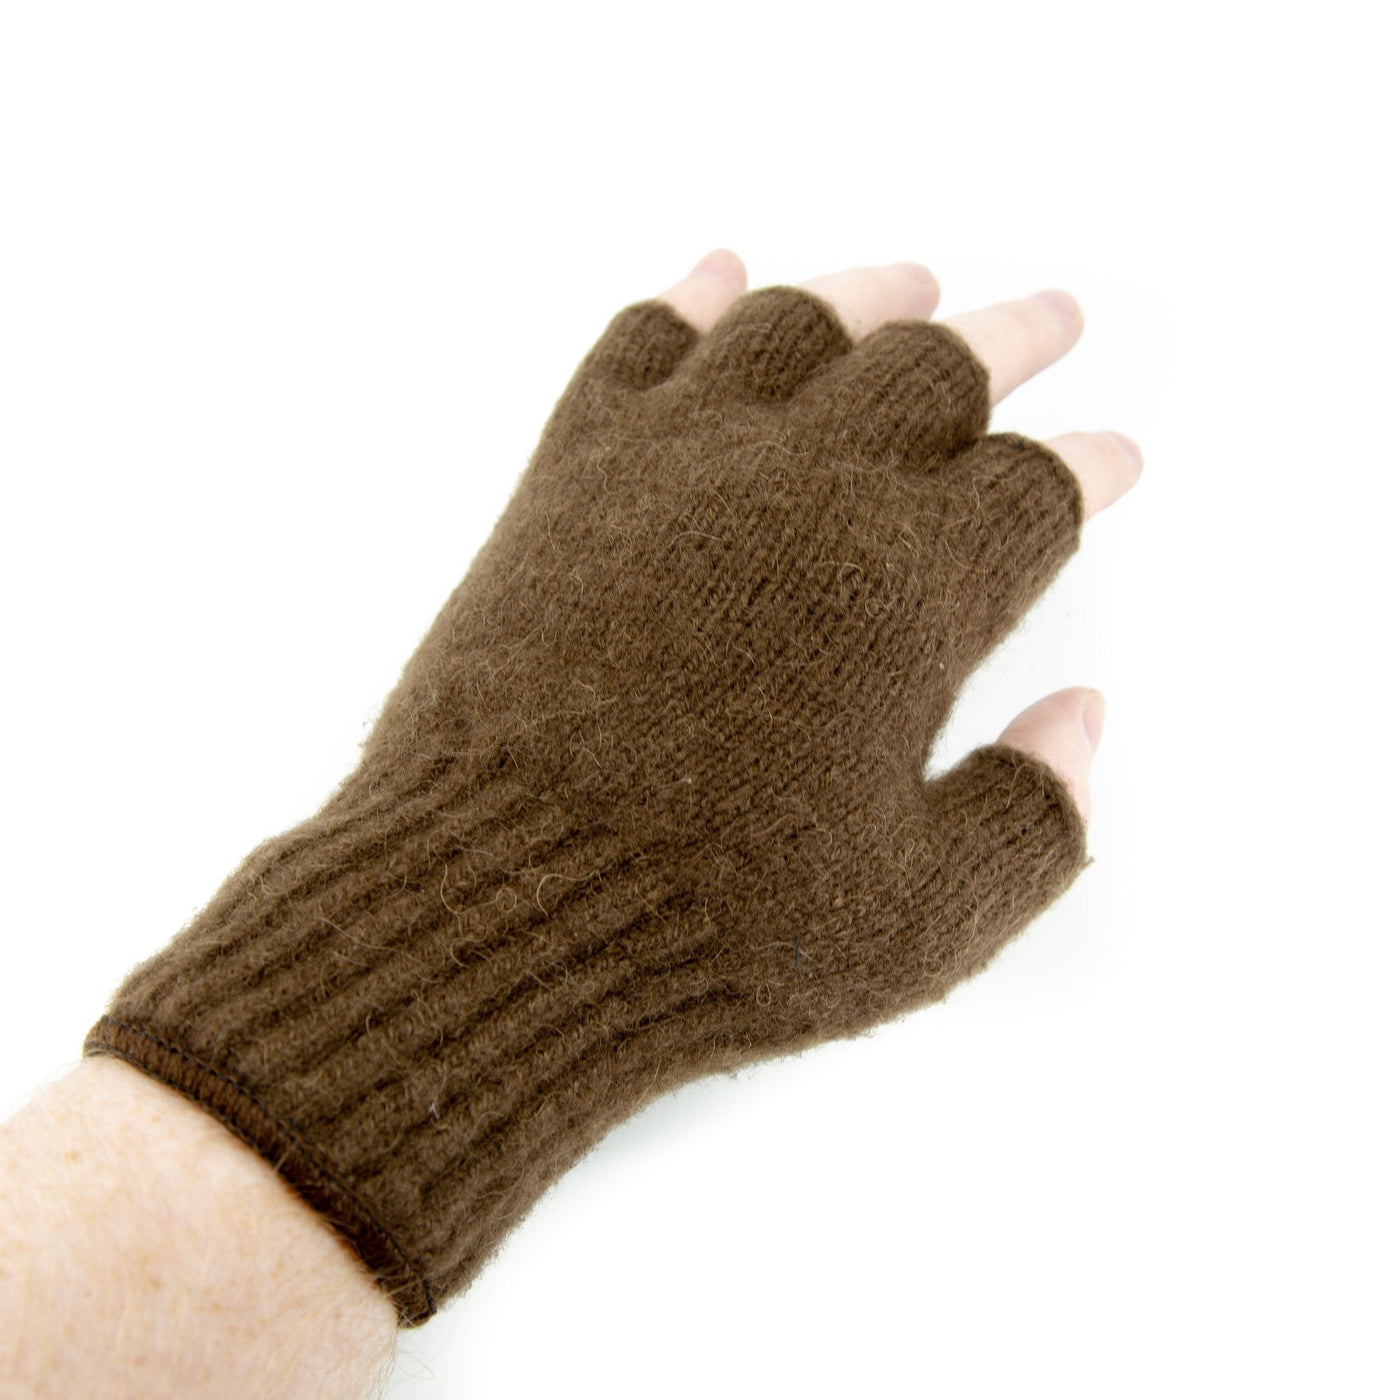 Extreme Gear Bison Down Fingerless Gloves (Brown or Black) Bison Gear The Buffalo Wool Co. Small Brown 